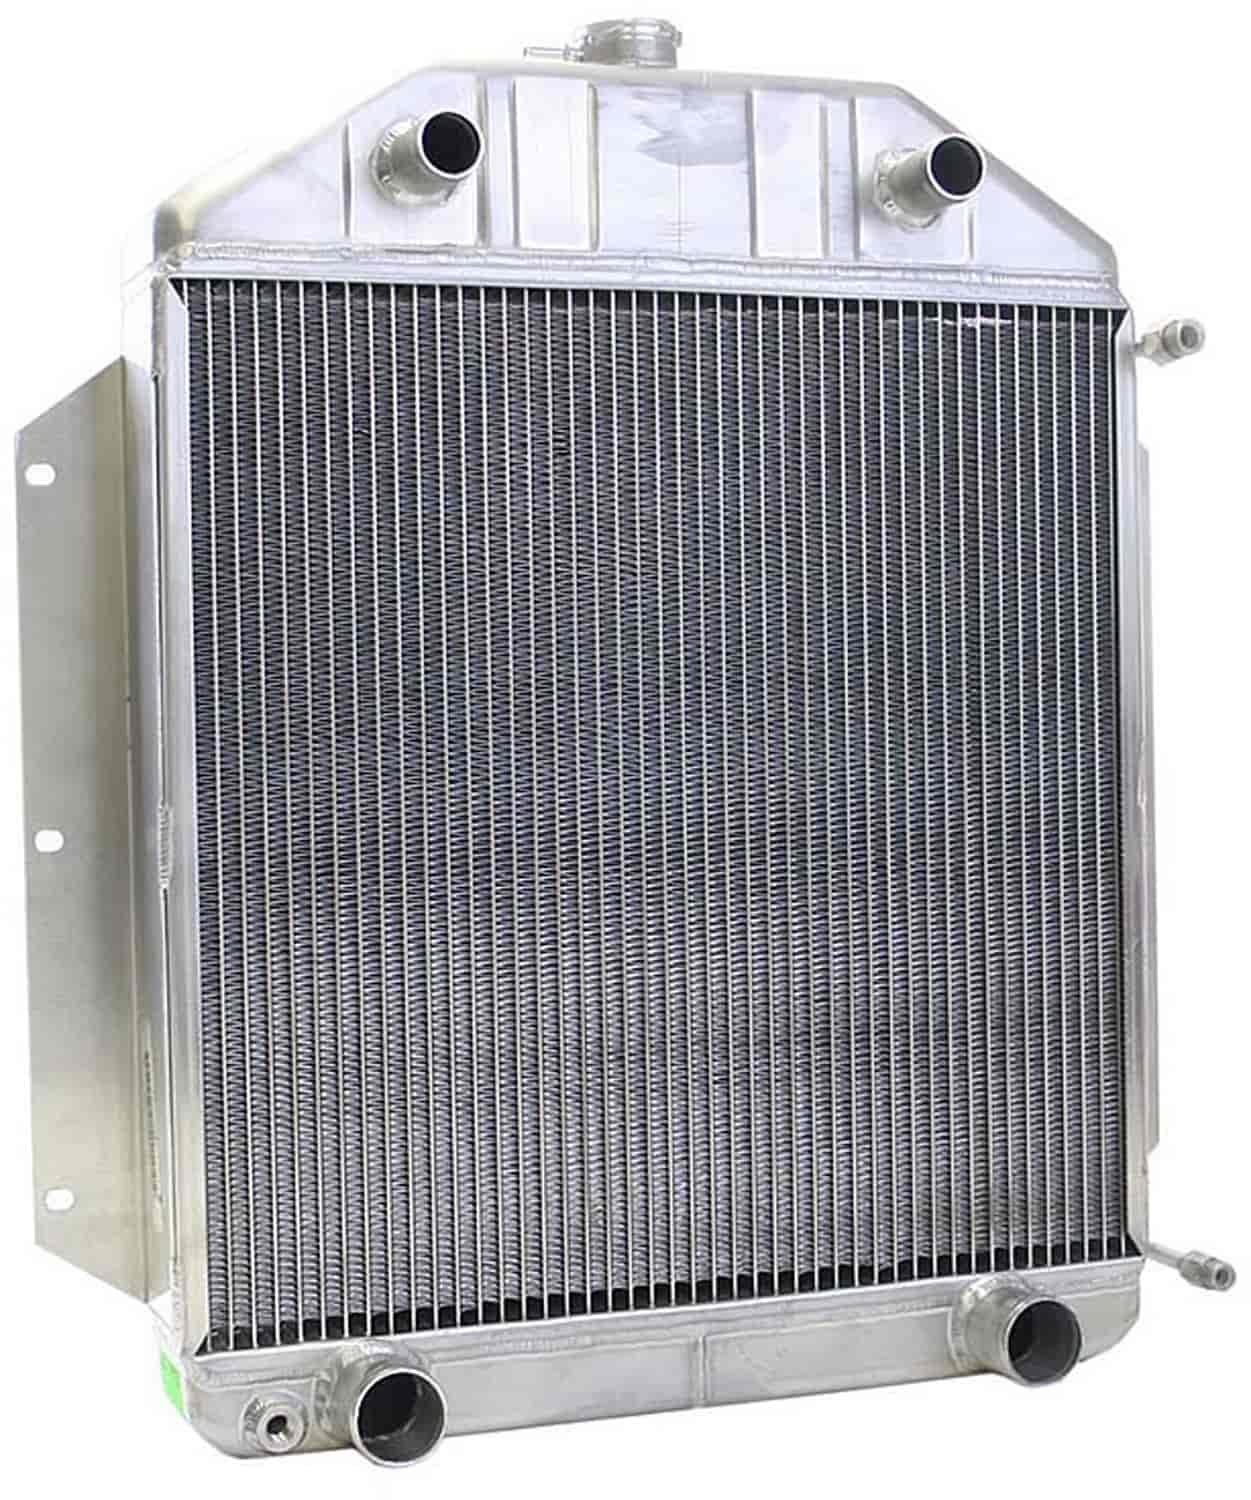 ExactFit Radiator for 1949-1953 Ford/Mercury Car with Late